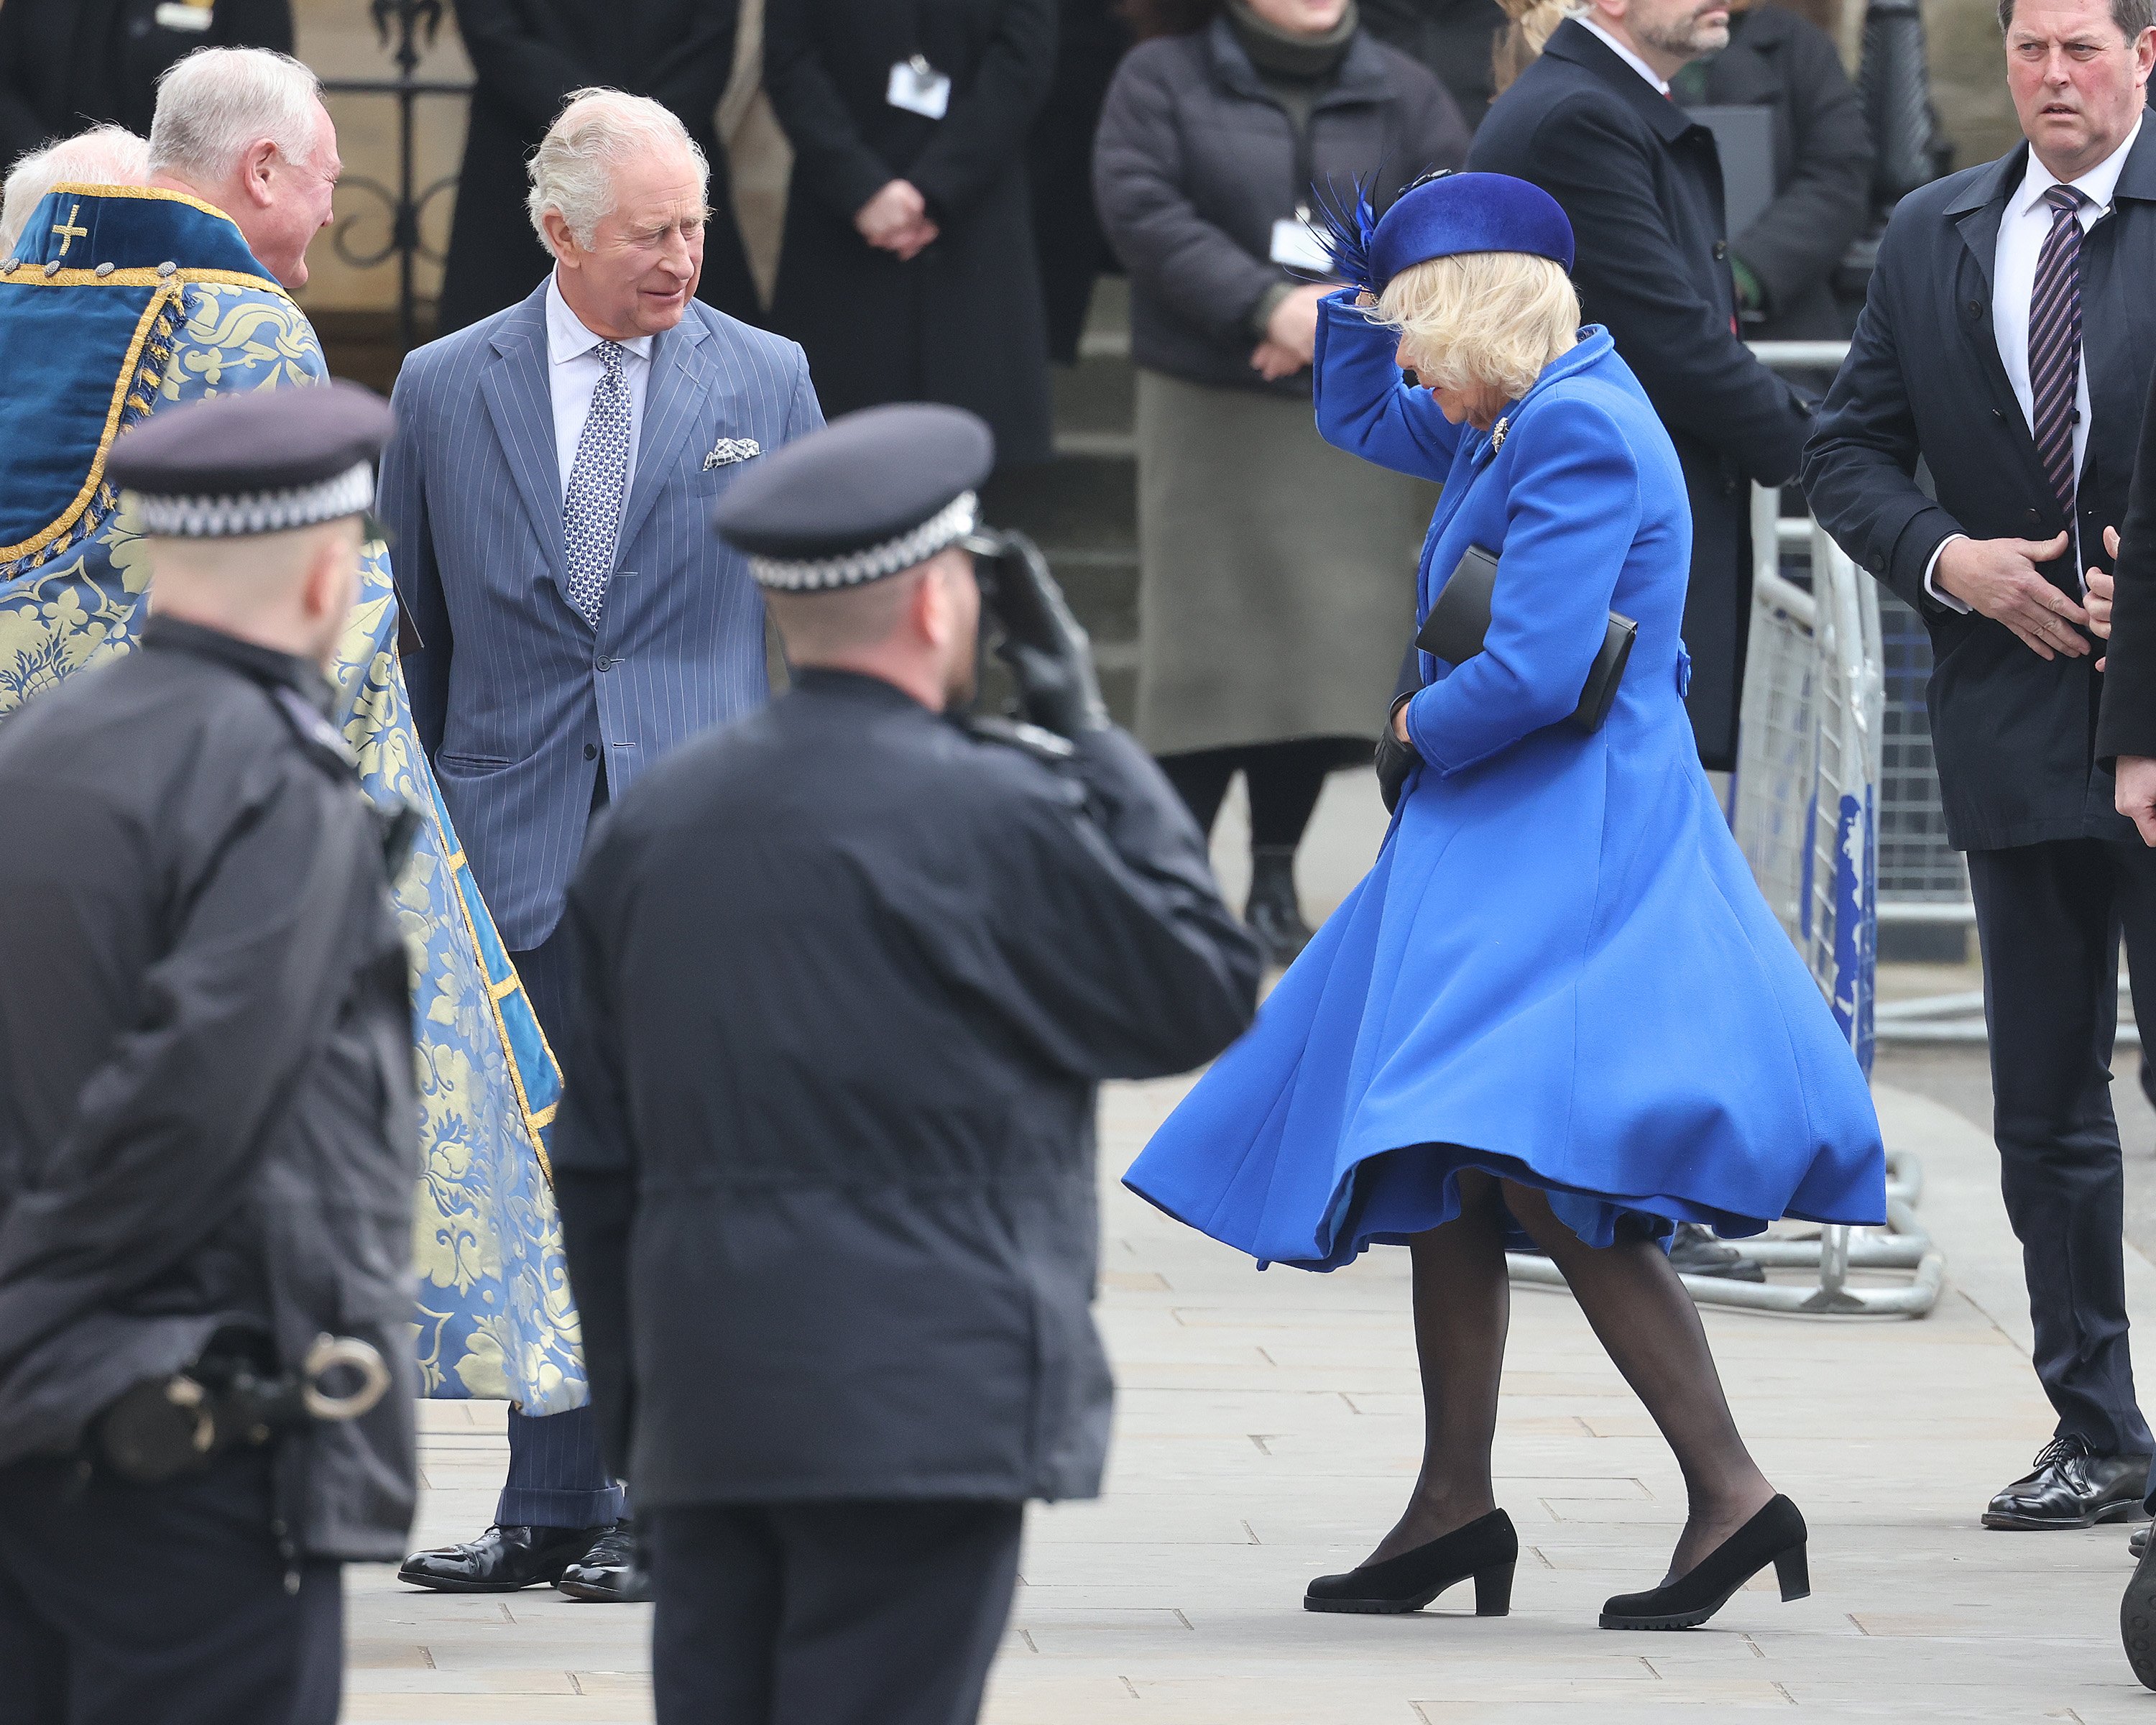 King Charles III and Camilla Parker Bowles attend the 2023 Commonwealth Day Service at Westminster Abbey